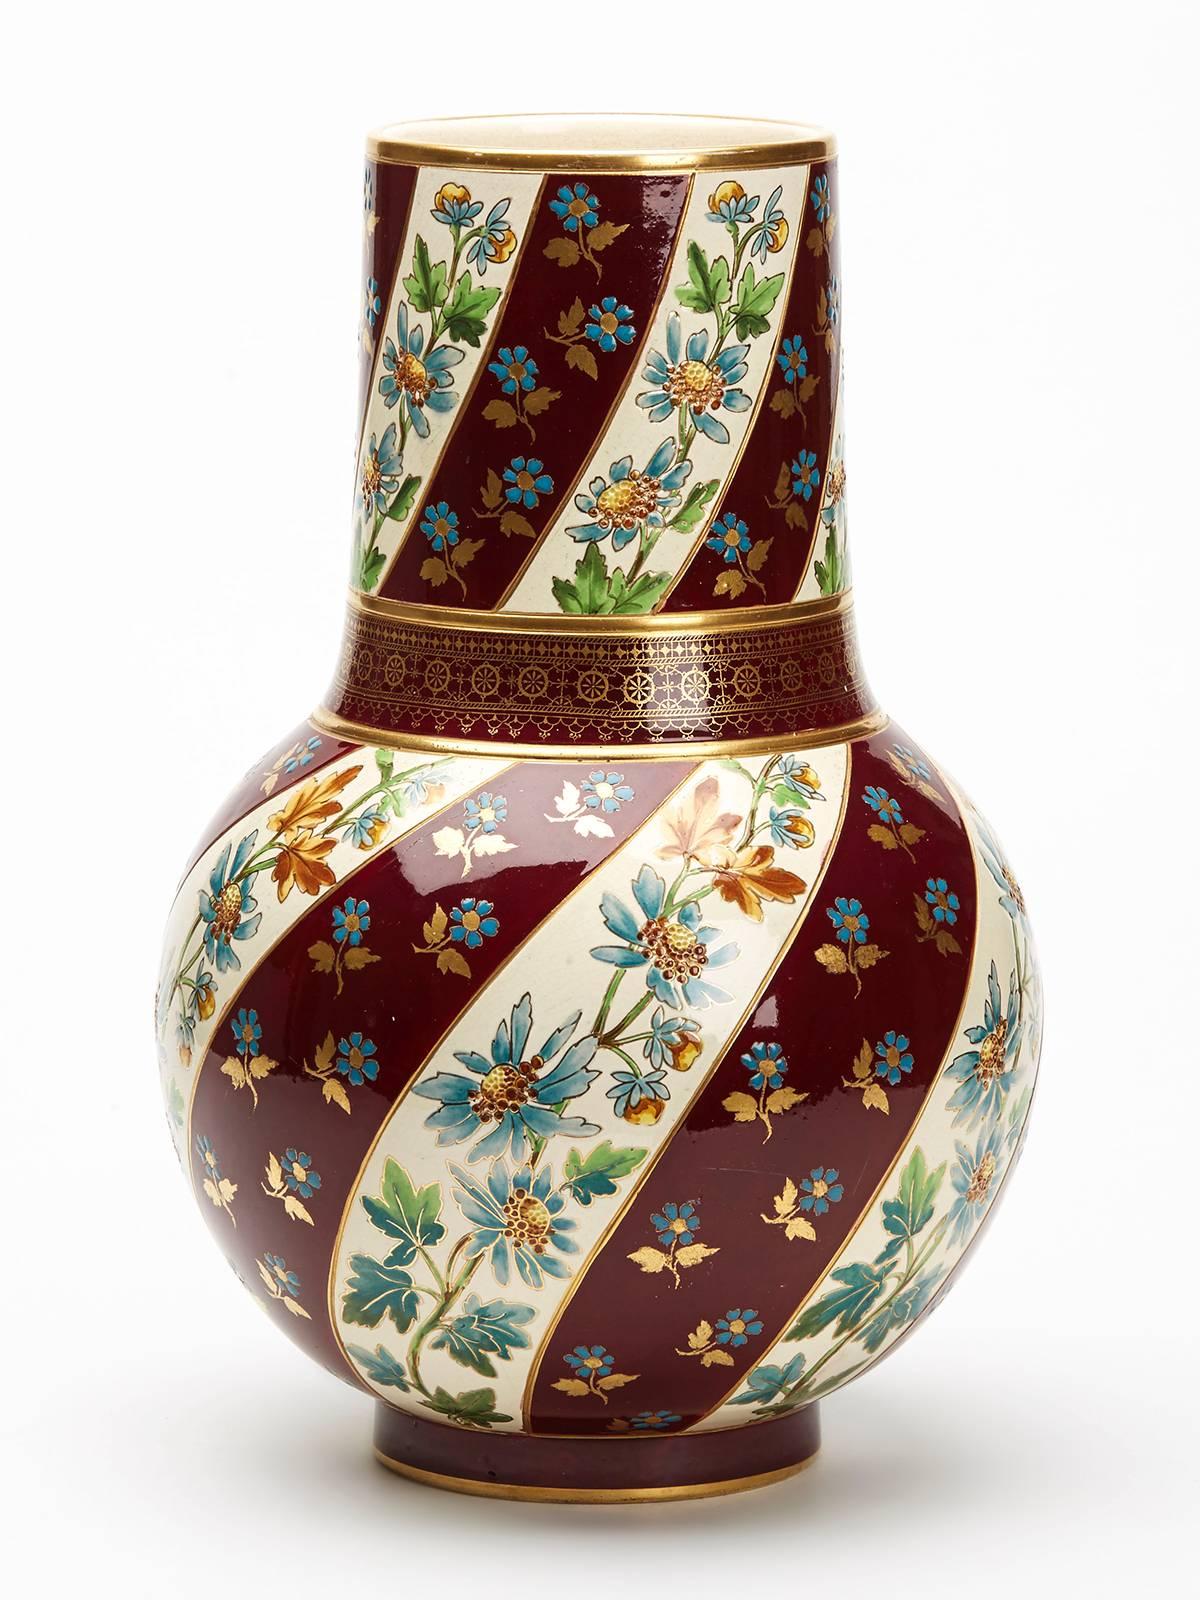 A large and stunning antique French Sarreguemines art pottery vase hand-painted with floral designs on a mauve and cream coloured banding with gilded highlights. The vase stands on a narrow rounded foot with a large rounded bulbous body and wide